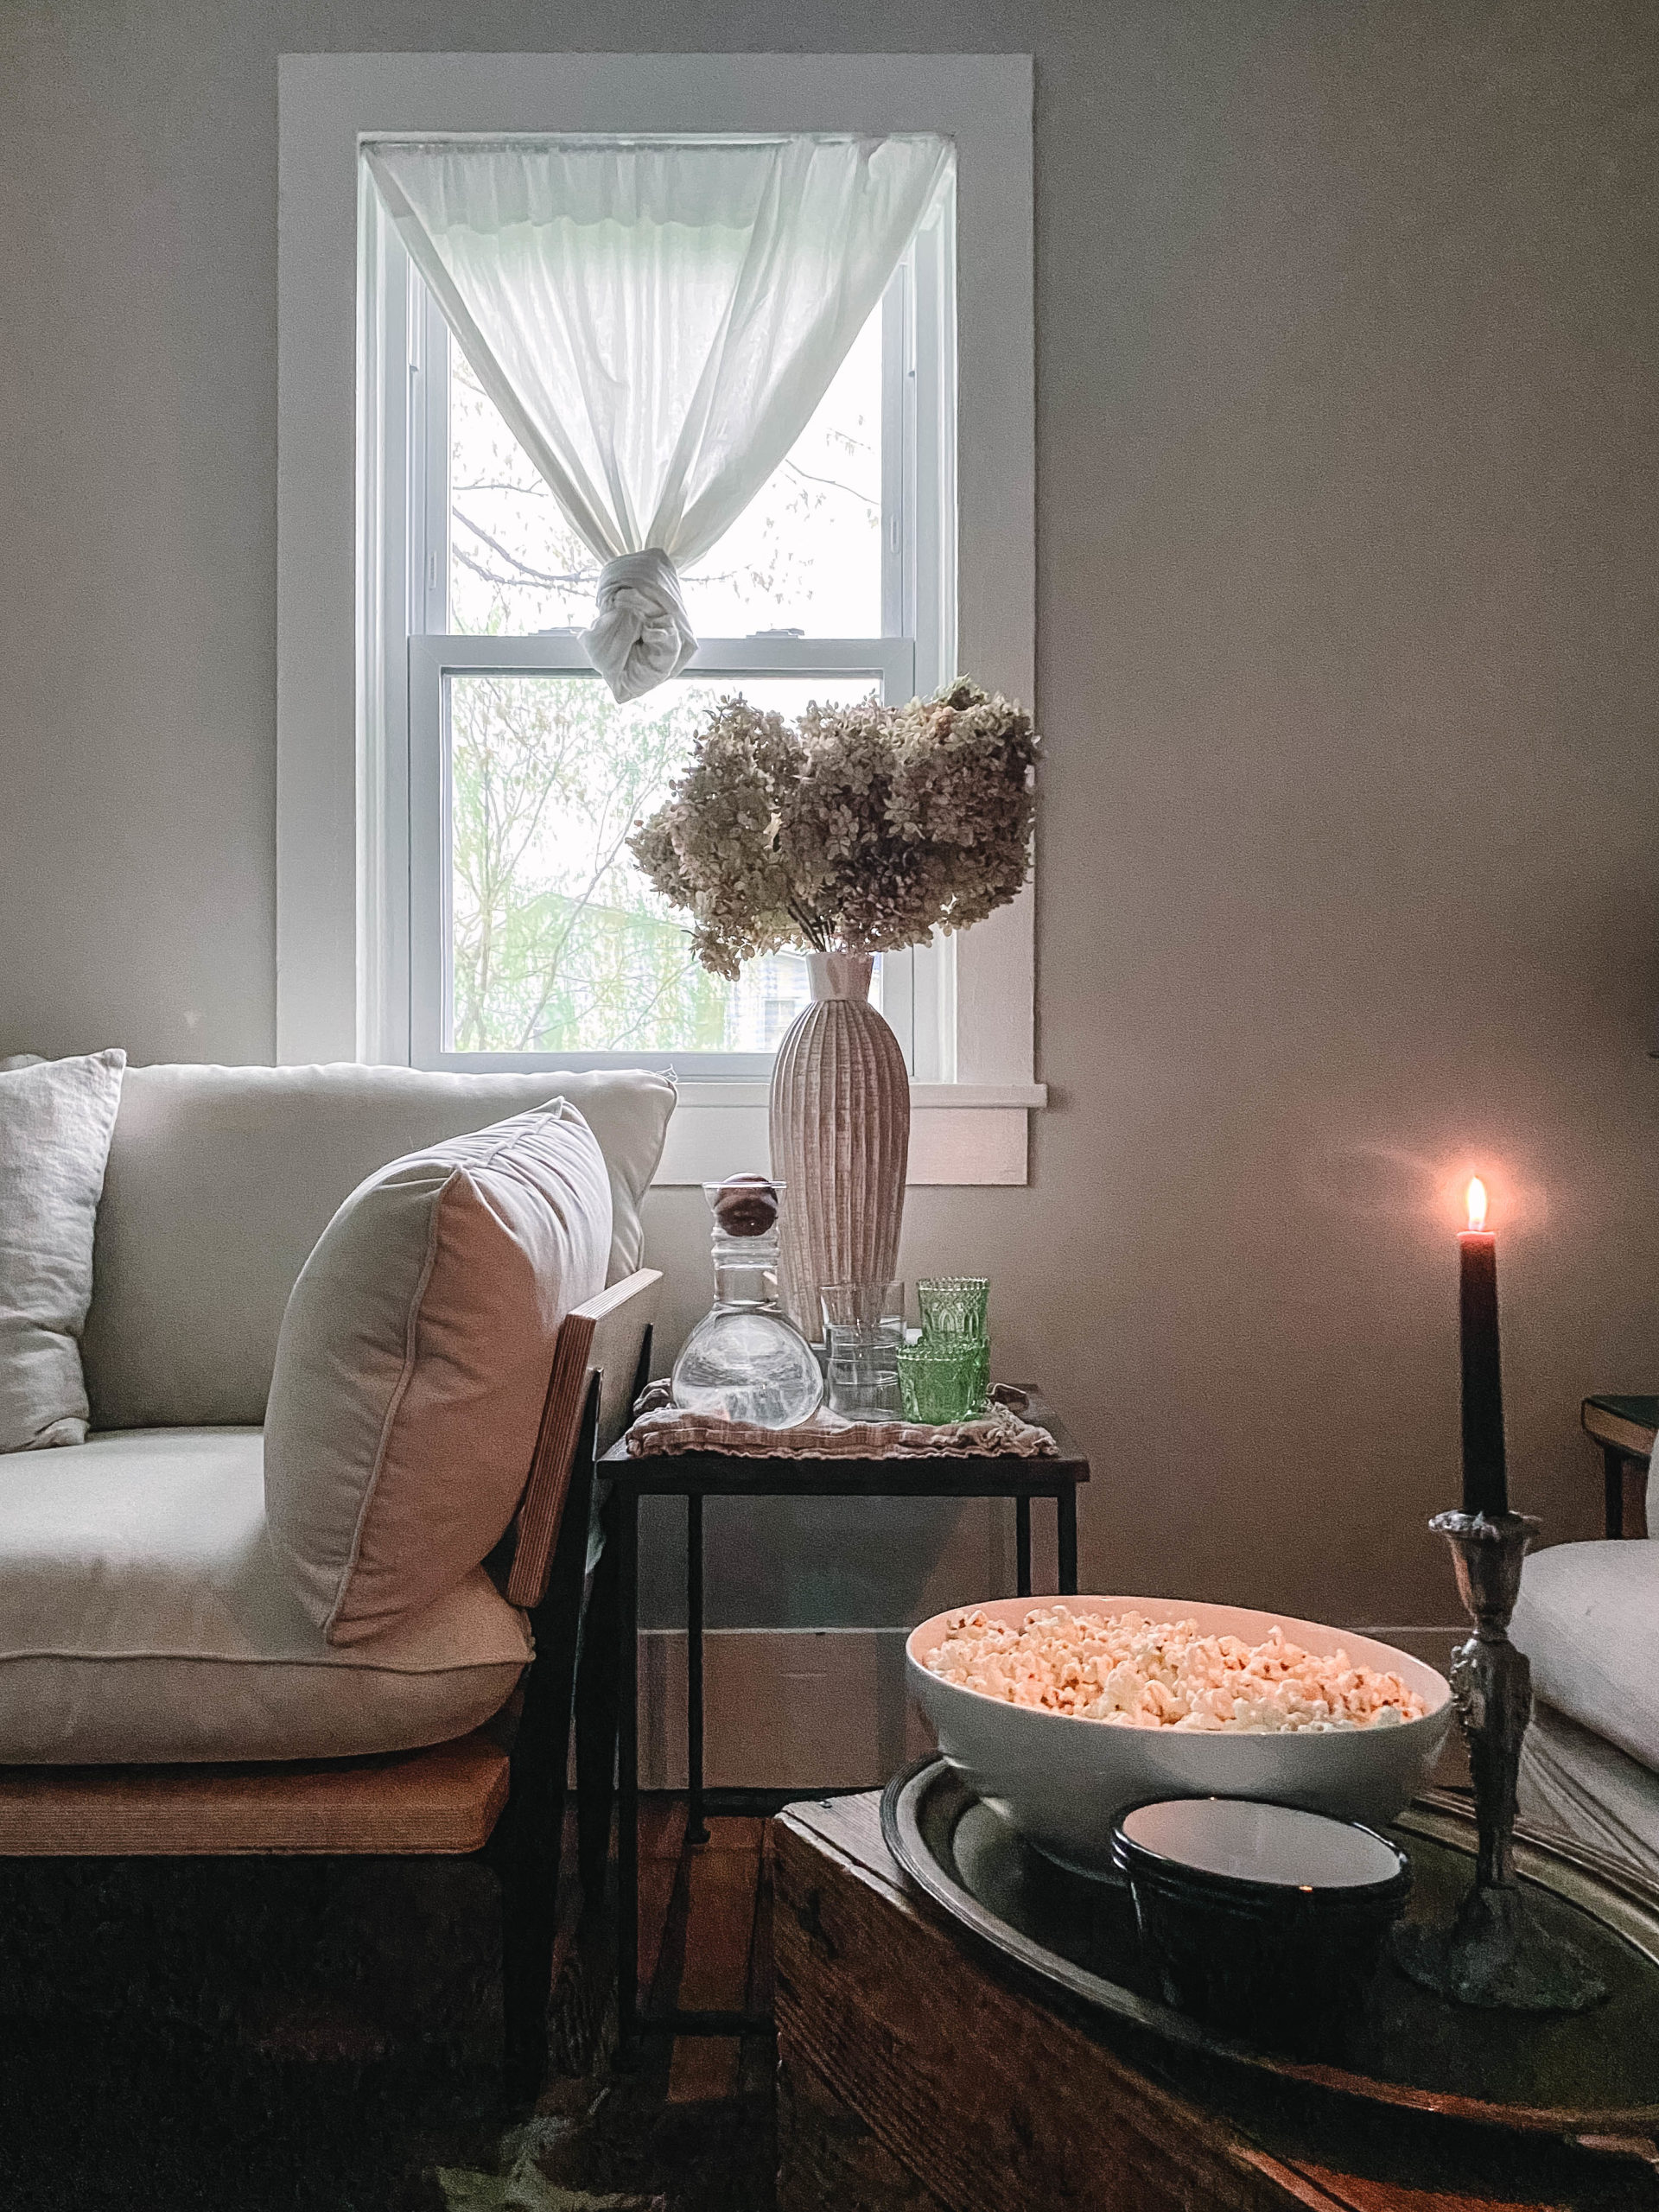 Cozy living room image with a candle lit, bowl of popcorn, drinks on side table.